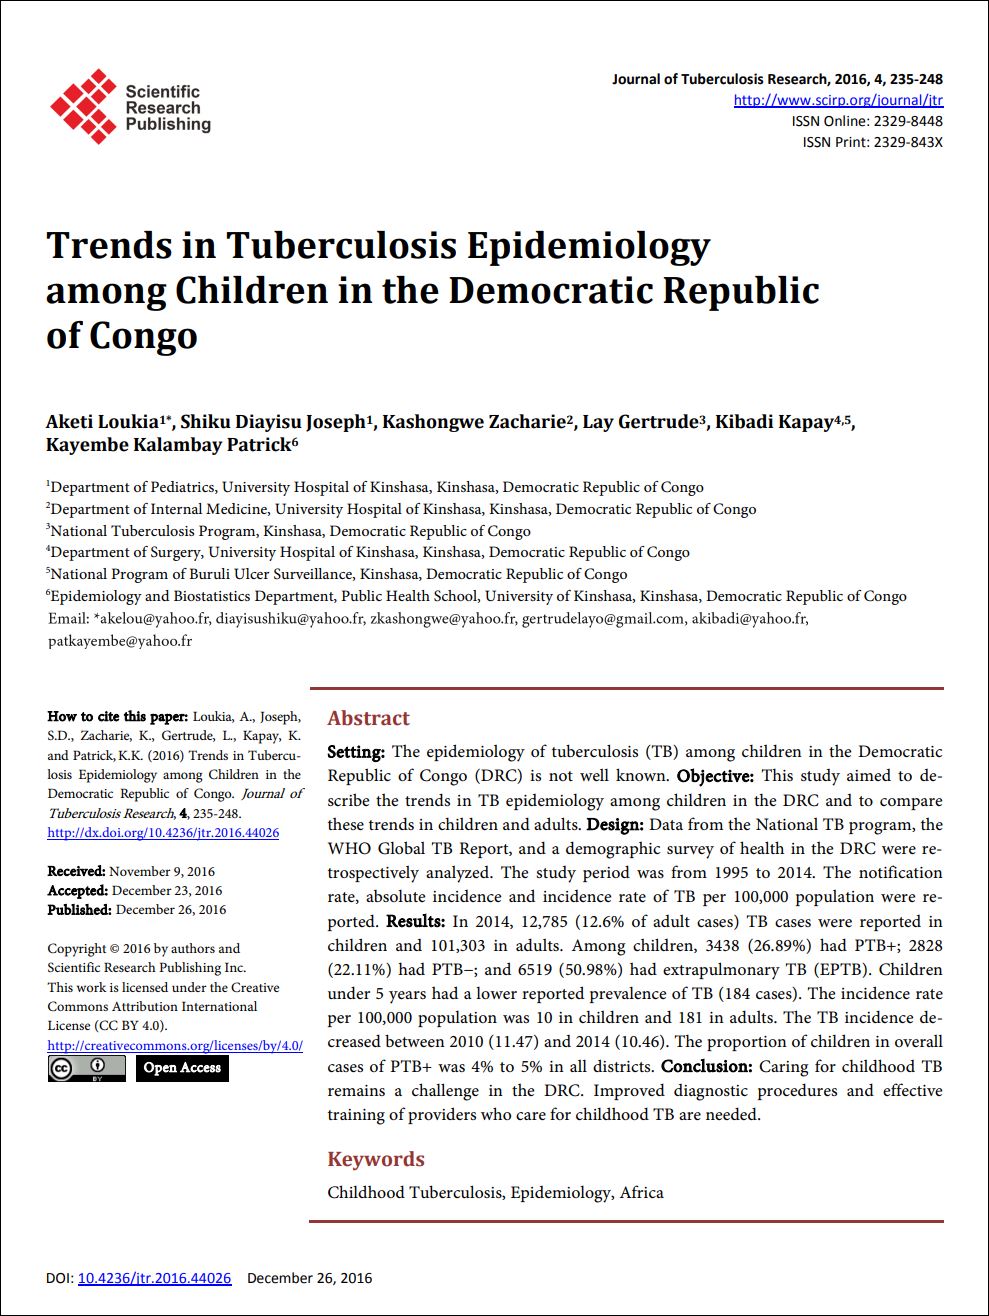 Trends in Tuberculosis Epidemiology among Children in the Democratic Republic of Congo